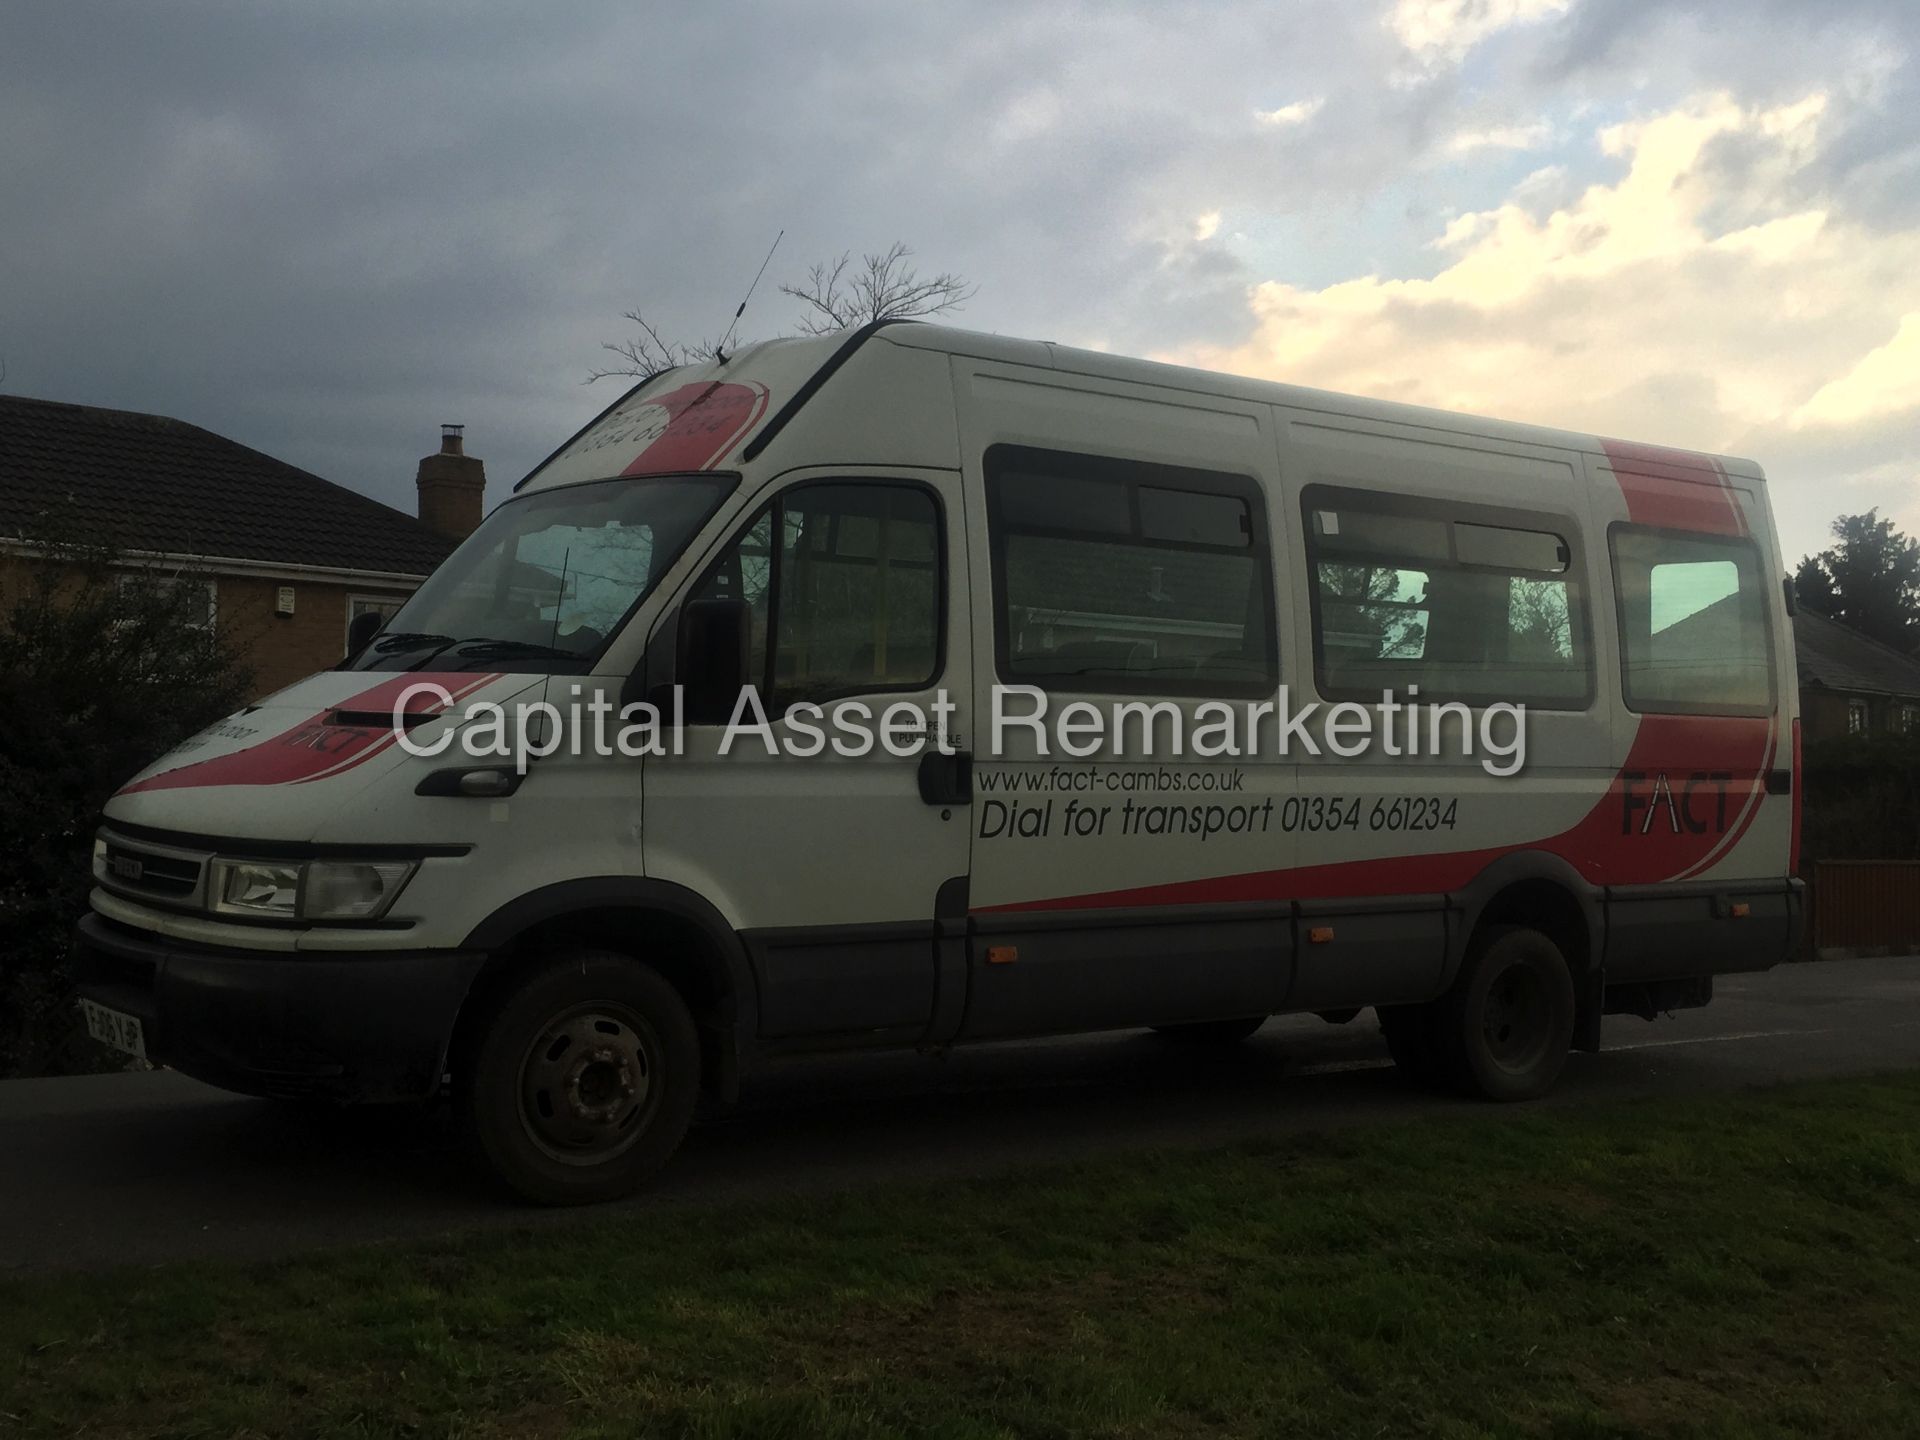 (ON SALE) IVECO DAILY 50C14 '17 SEATER MINI-BUS' (2006) 3.0 'DIESEL' - 150 BHP - 6 SPEED (NO VAT)